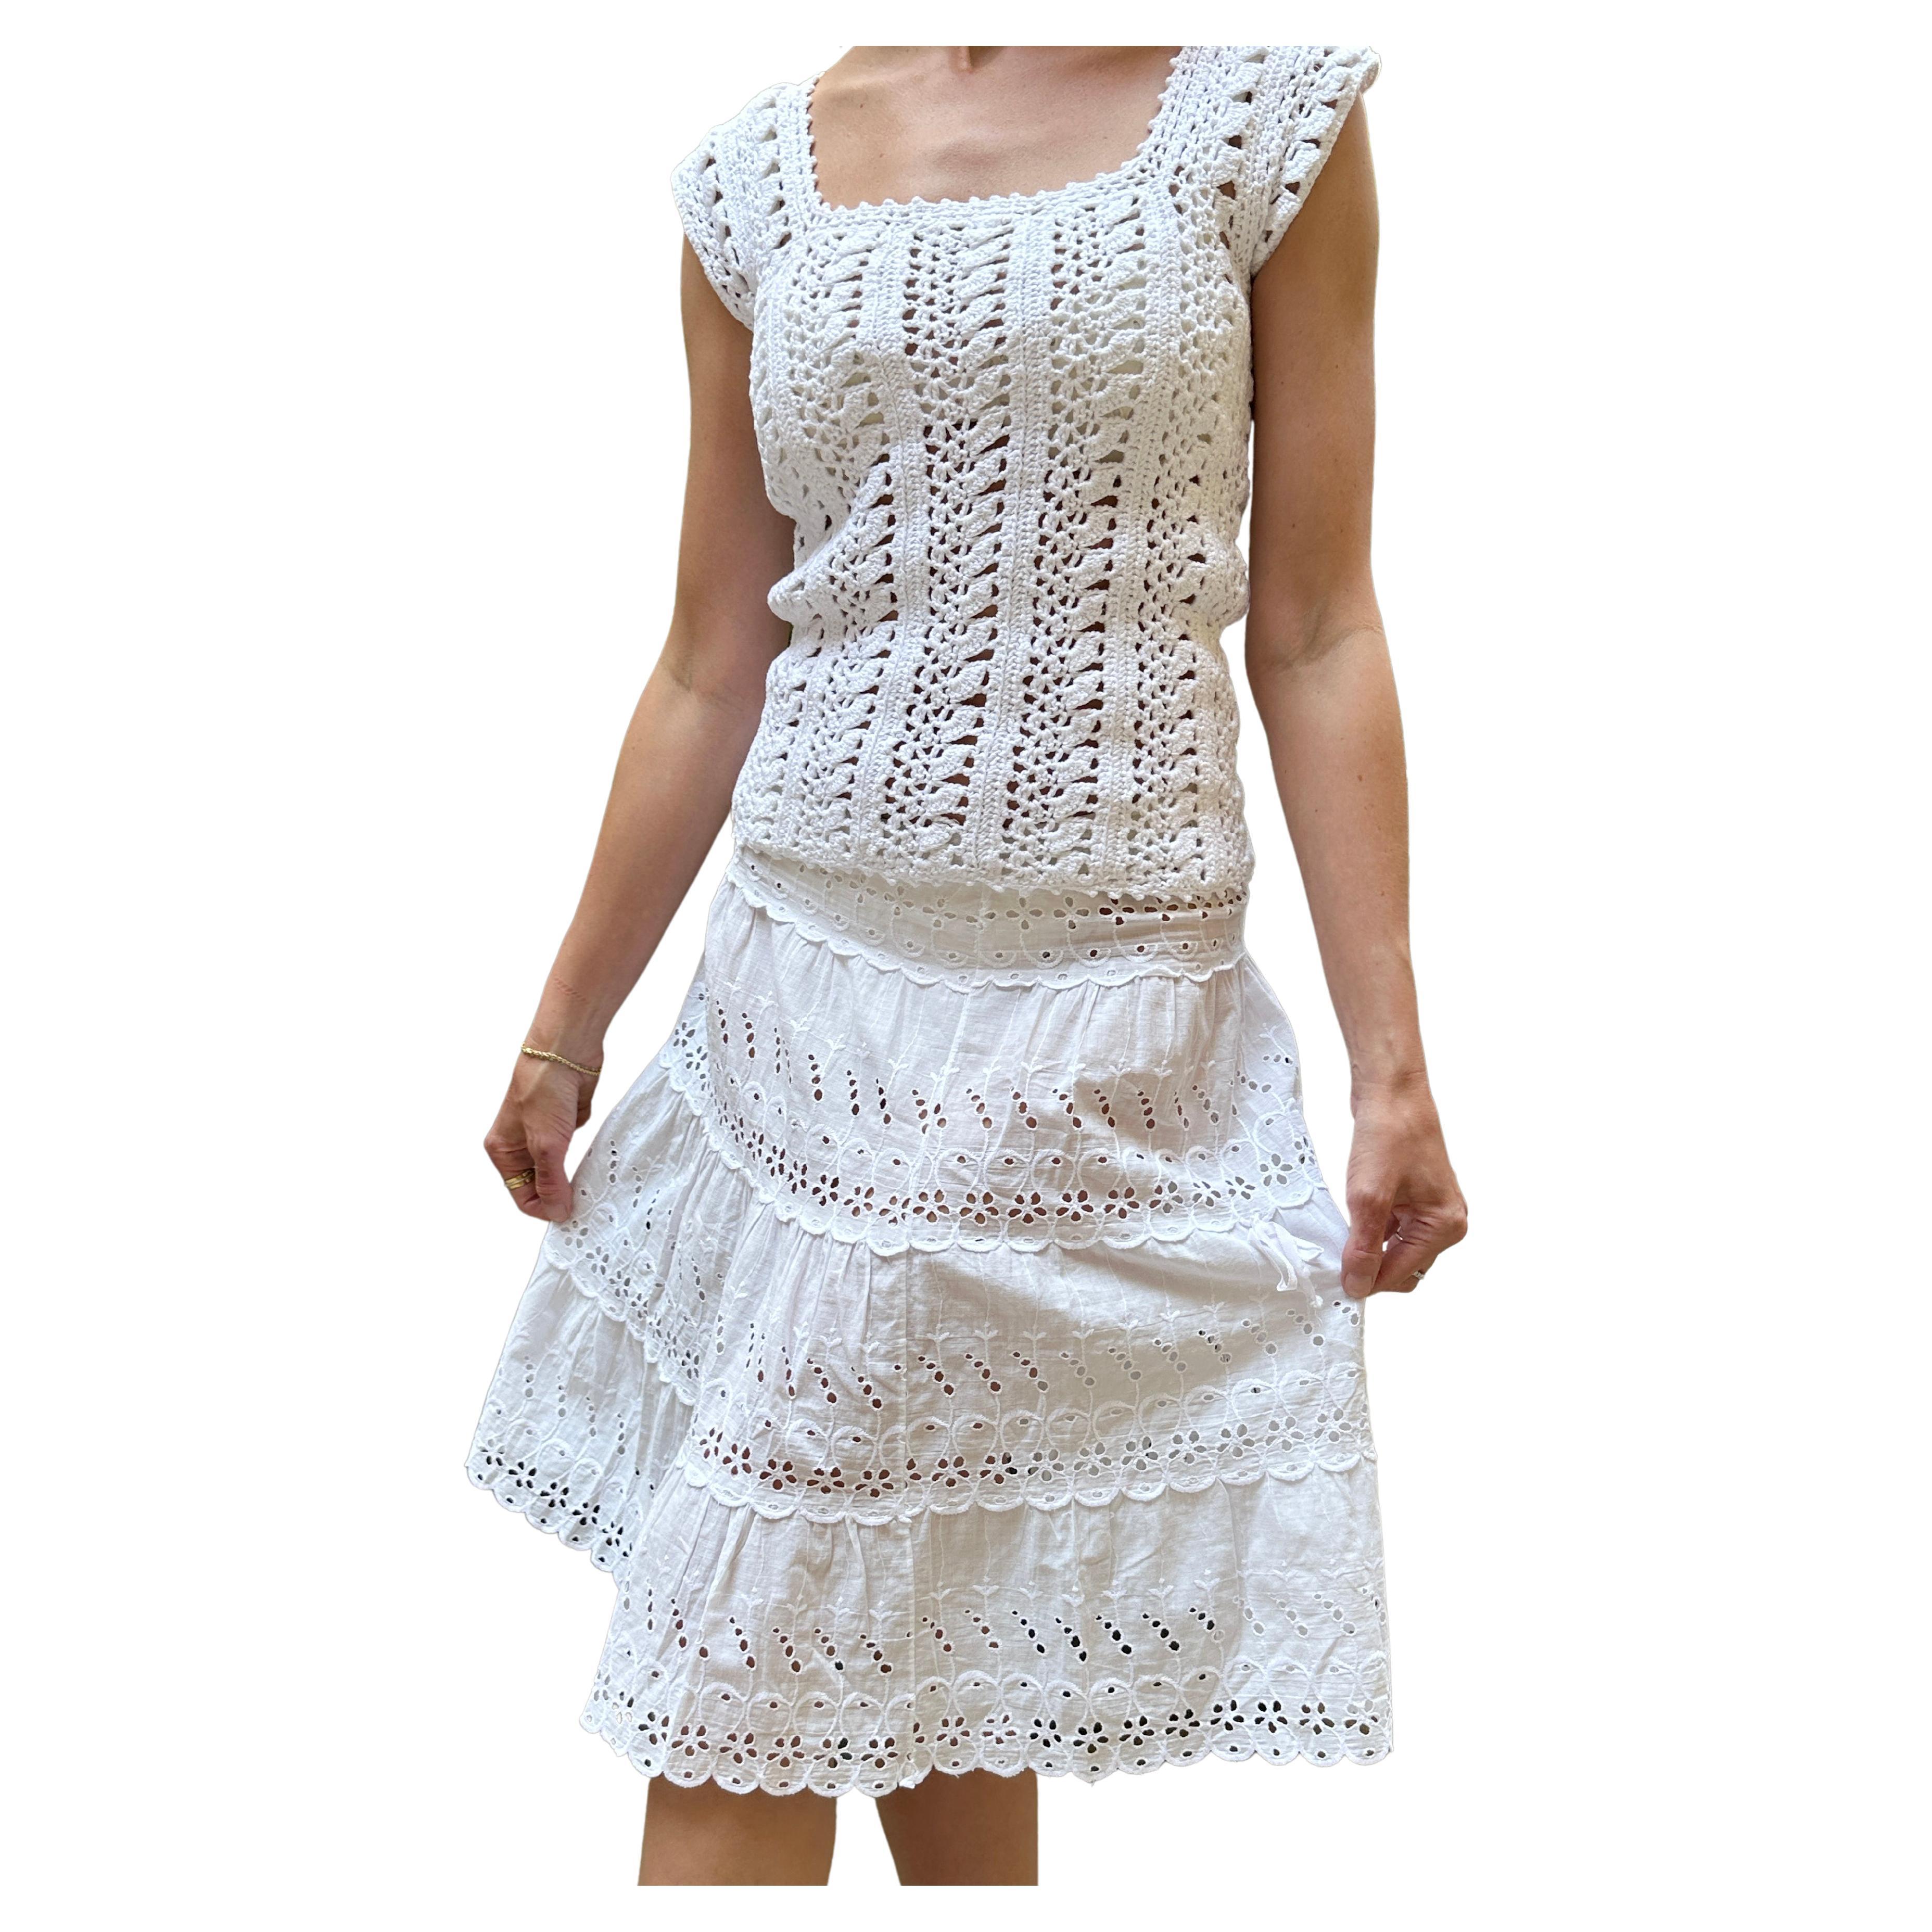 This vintage French 1950s white eyelet skirt is the sweetest thing— it reminds me of images of Brigitte Bardot in Saint Tropez in the 1950s and early 1960s. It's made entirely of four tiers of eyelet lace with scalloped details, and an A-line